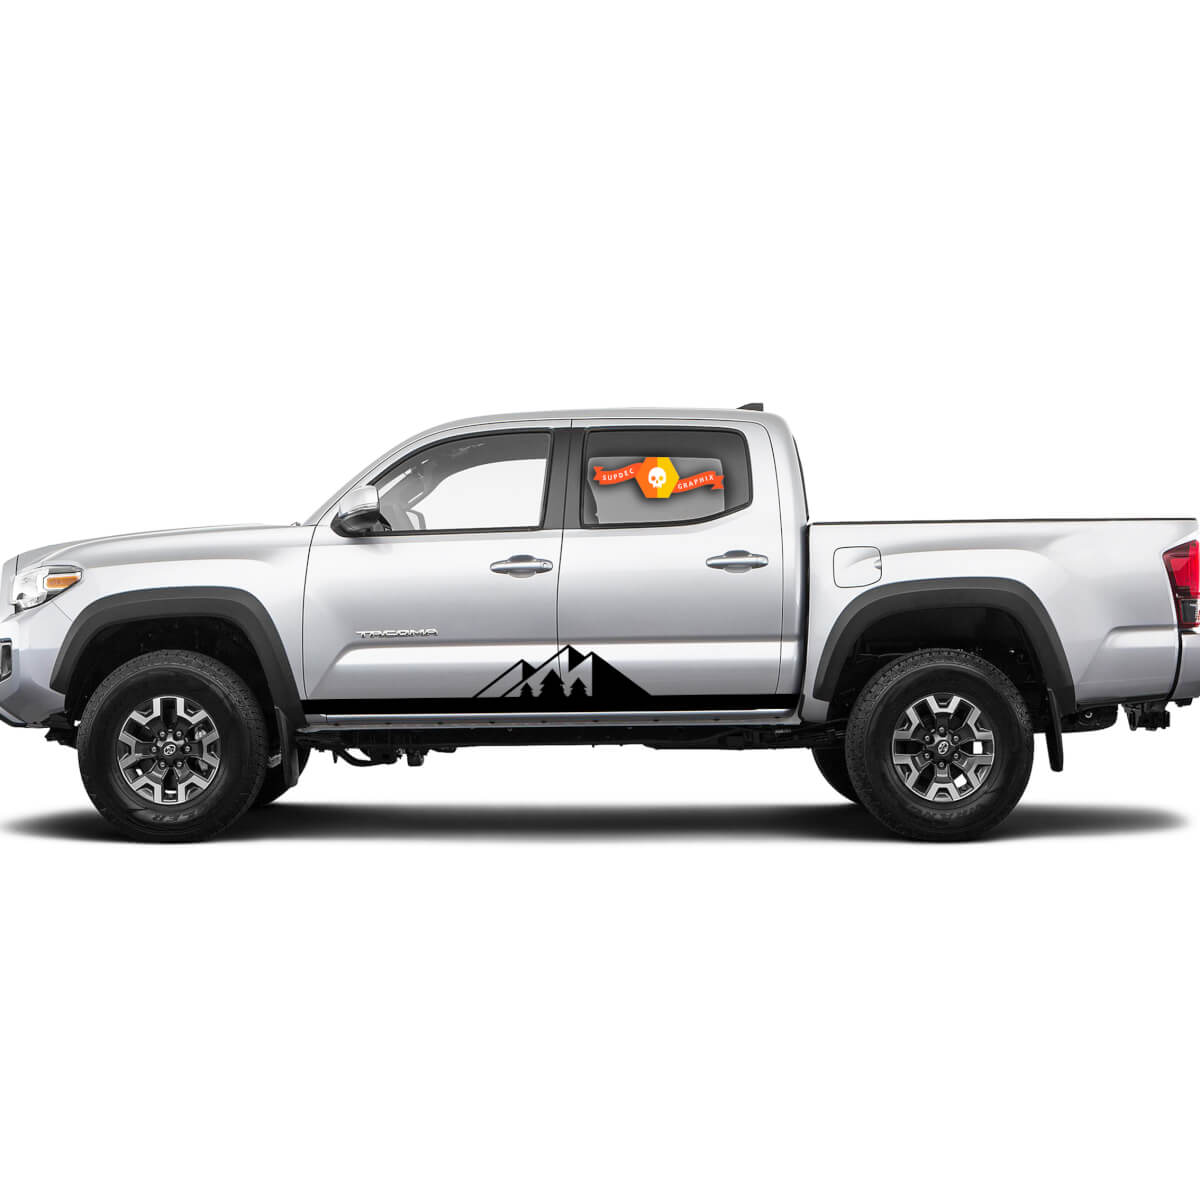 Pair Stripes for Tacoma Side Mountains Rocker Panel Vinyl Stickers Decal fit to Toyota Tacoma TRD Off Road Pro Sport